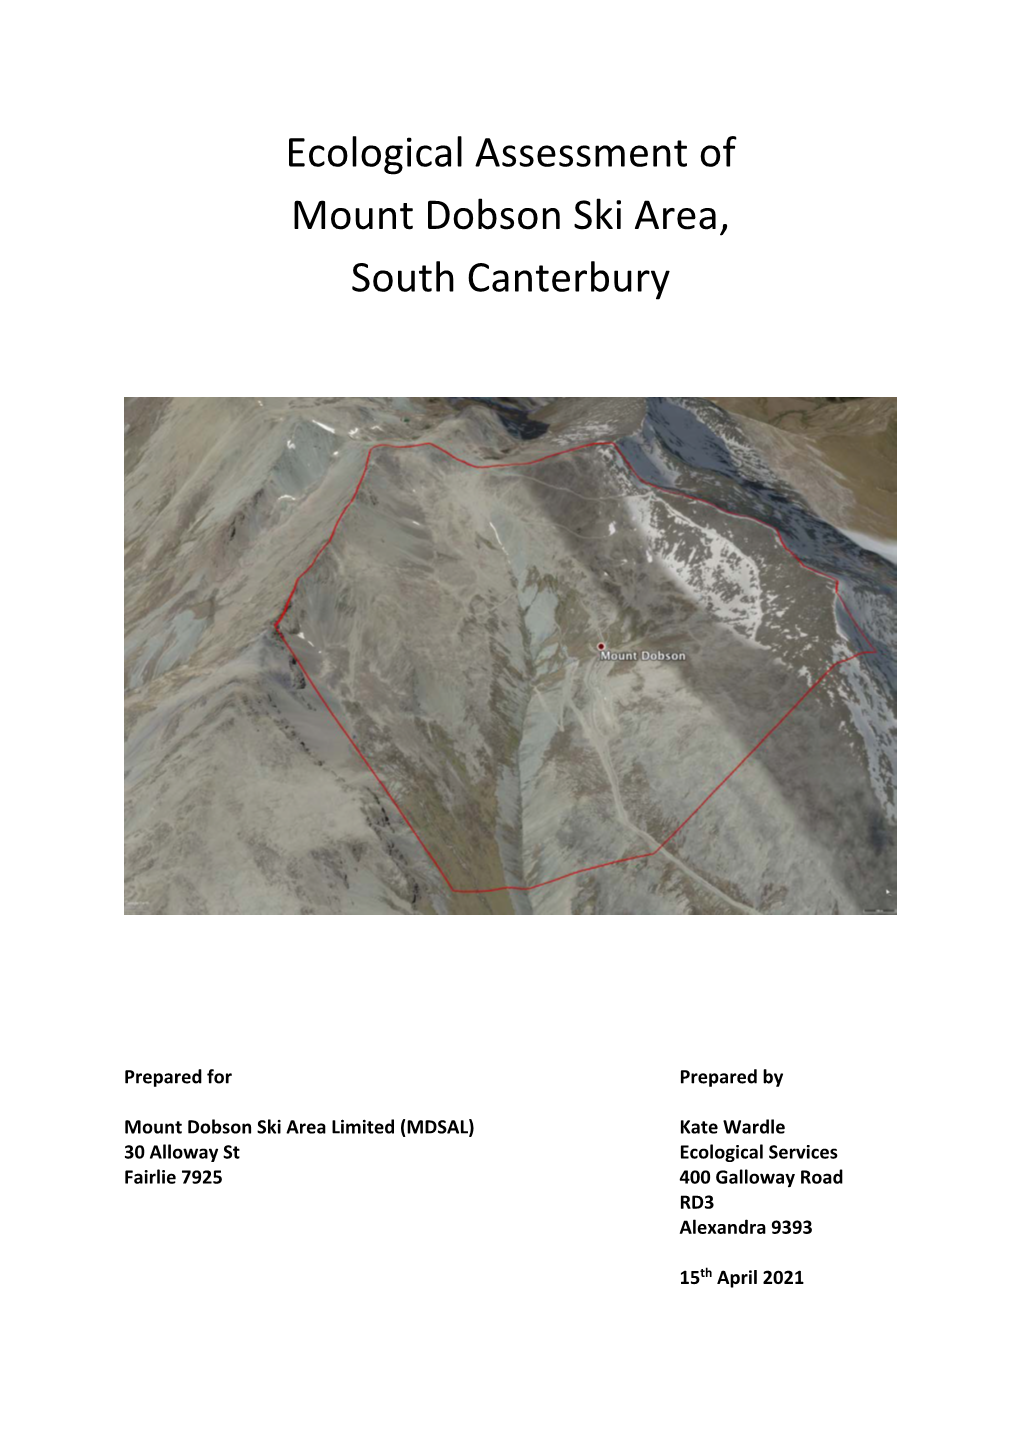 Ecological Assessment of Mount Dobson Ski Area, South Canterbury